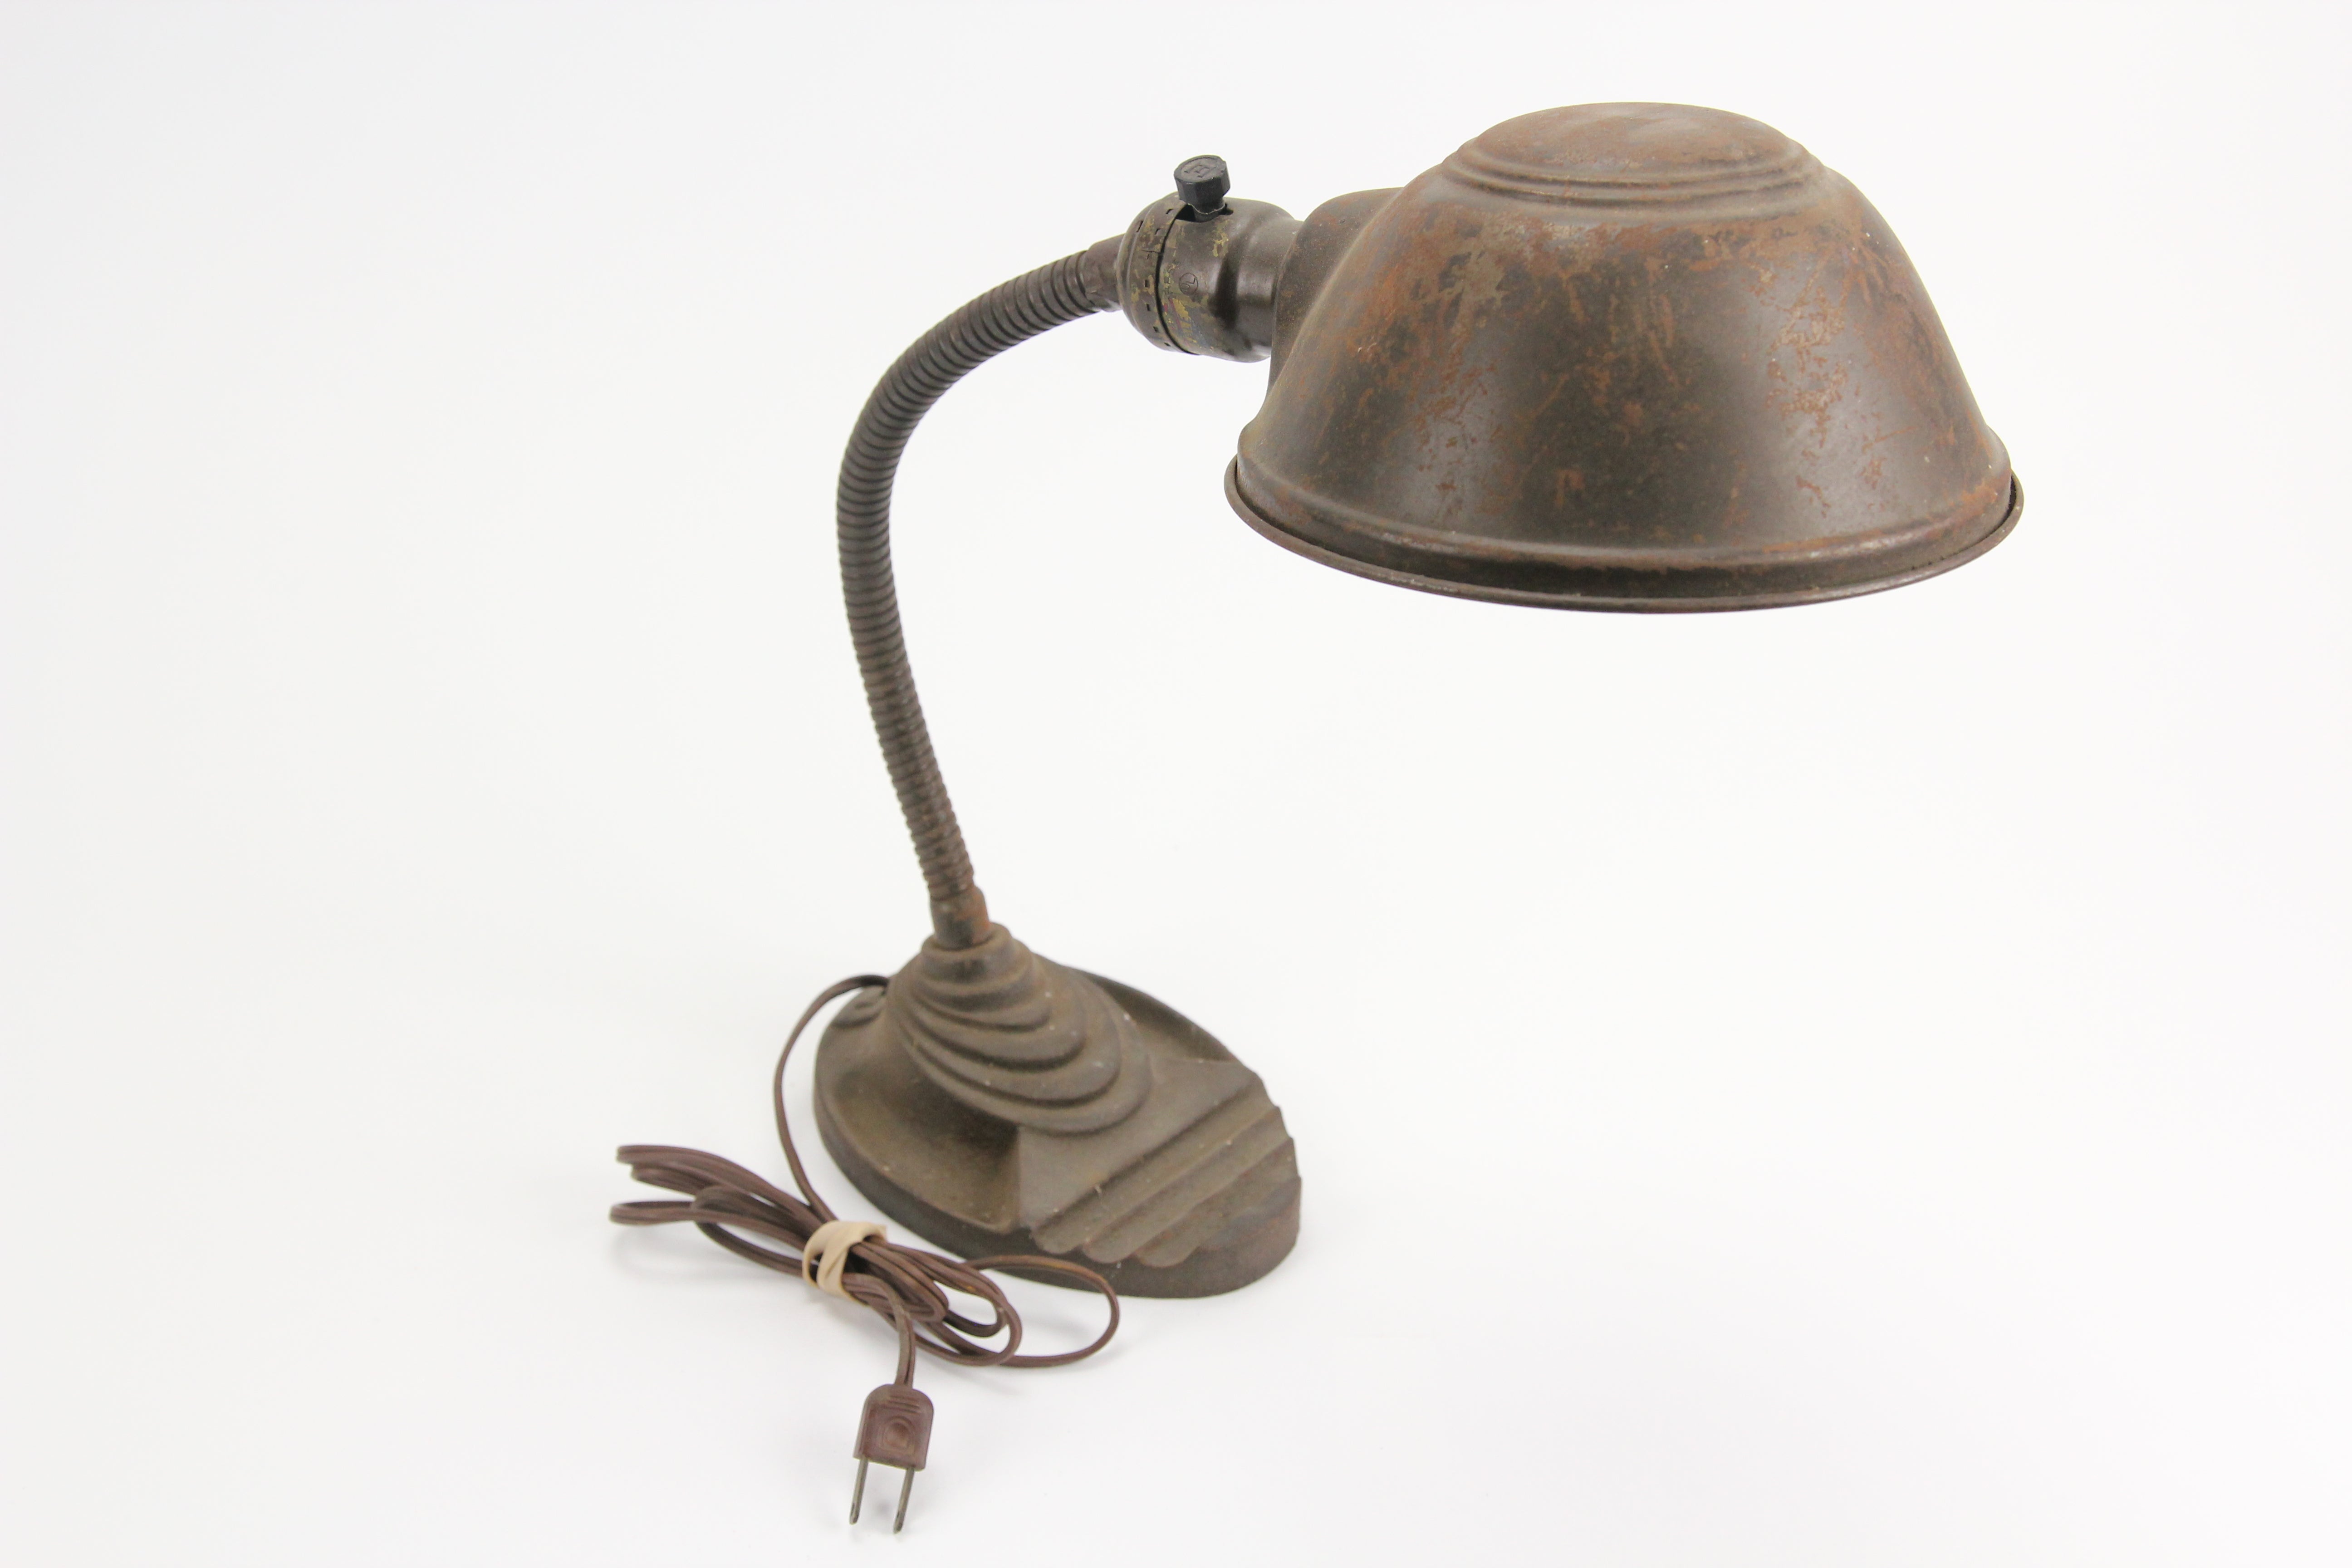 Eagle Utility Desk Lamp.Made in USA | www.innoveering.net